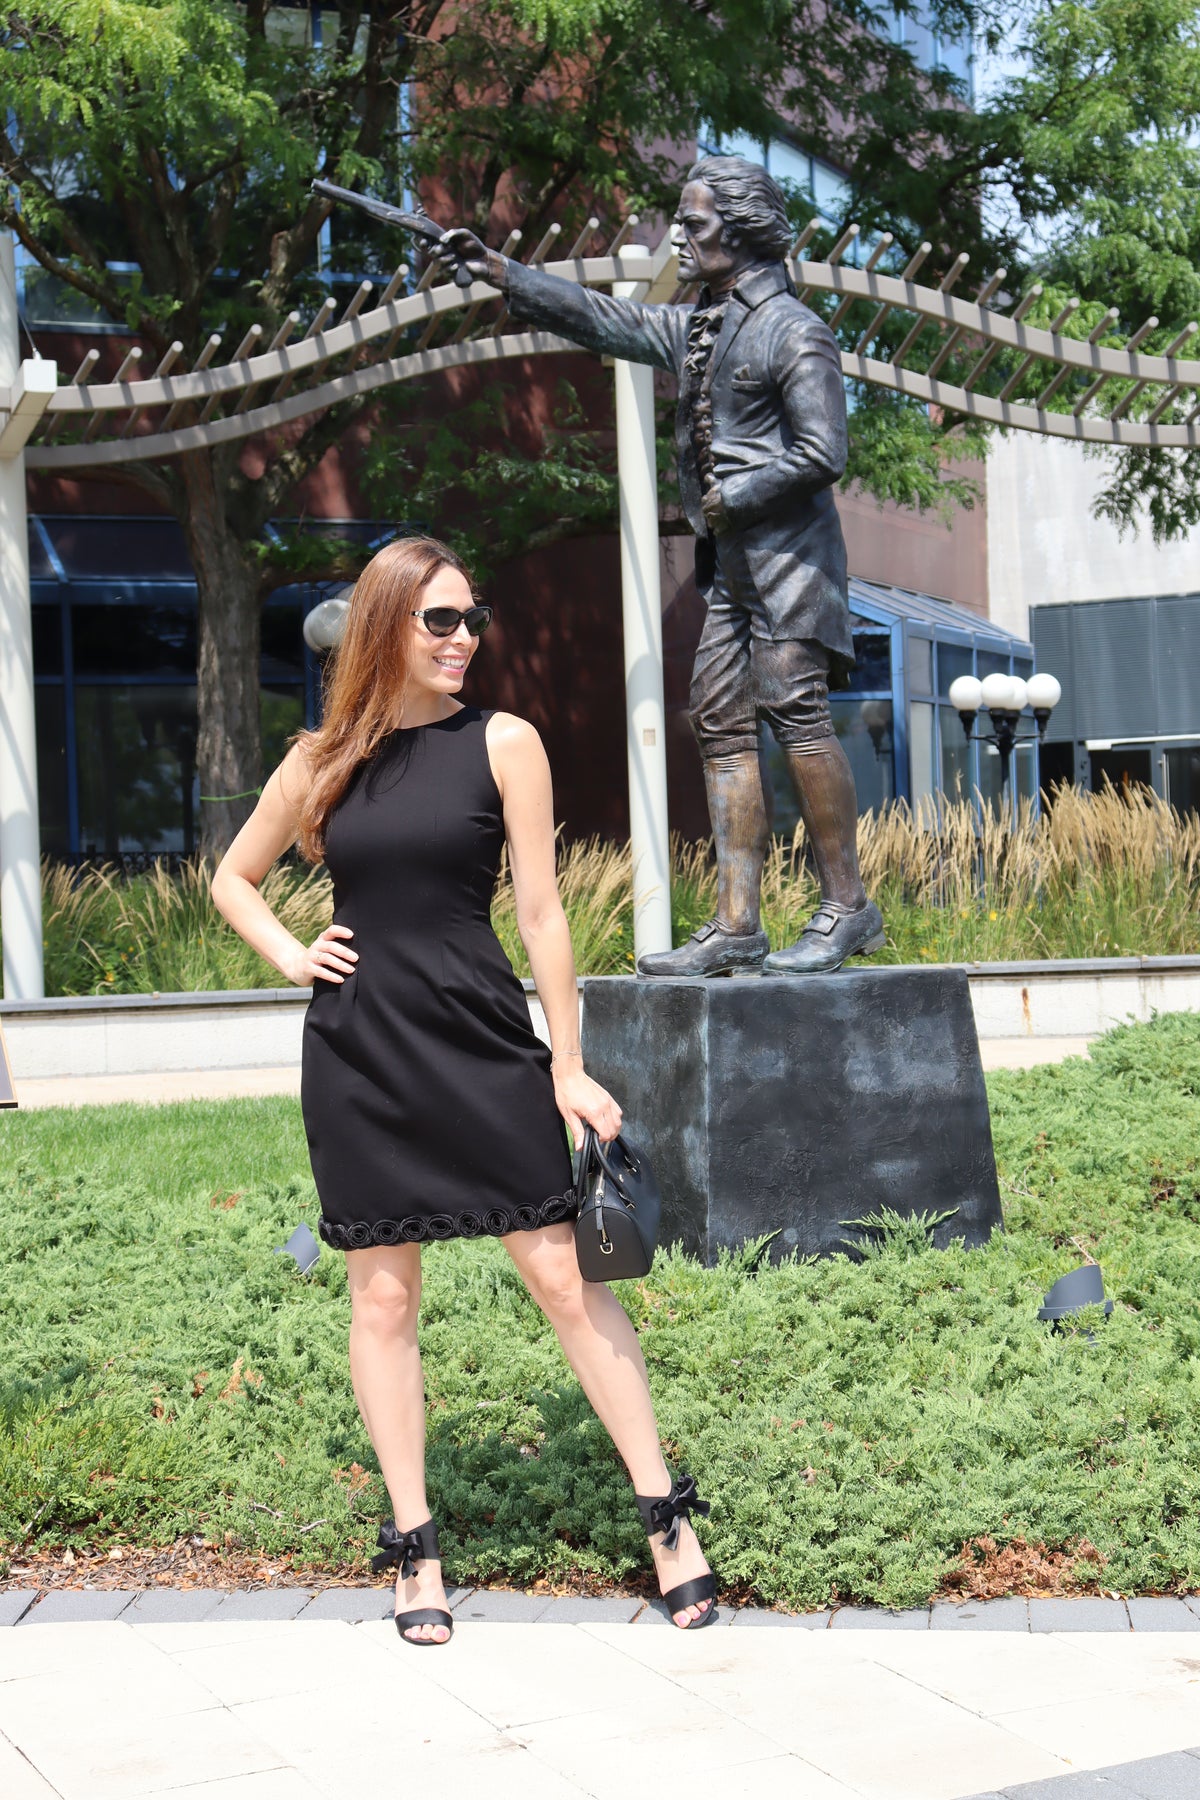 Model standing near statue. Sporting our Run for the Roses black dress. Styled with black shoes, sunglasses and handbag